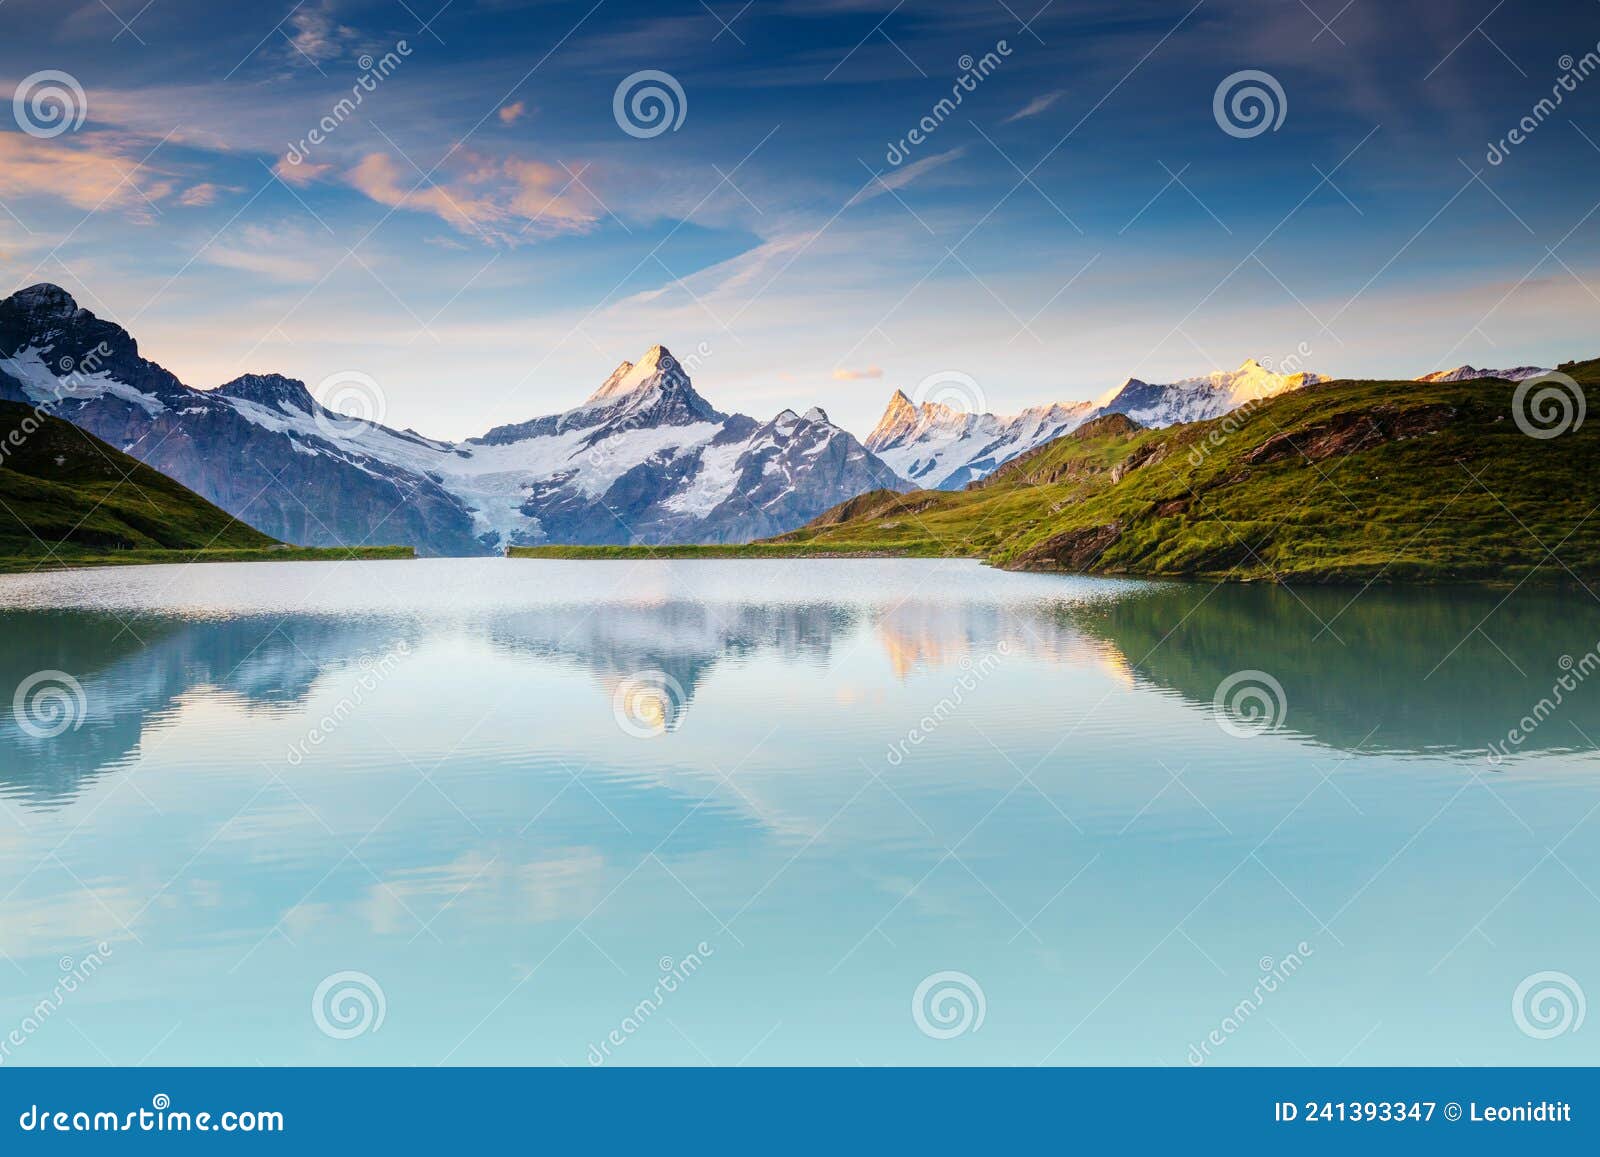 Great View Of The Snow Rocky Massif Location Bachalpsee In Swiss Alps